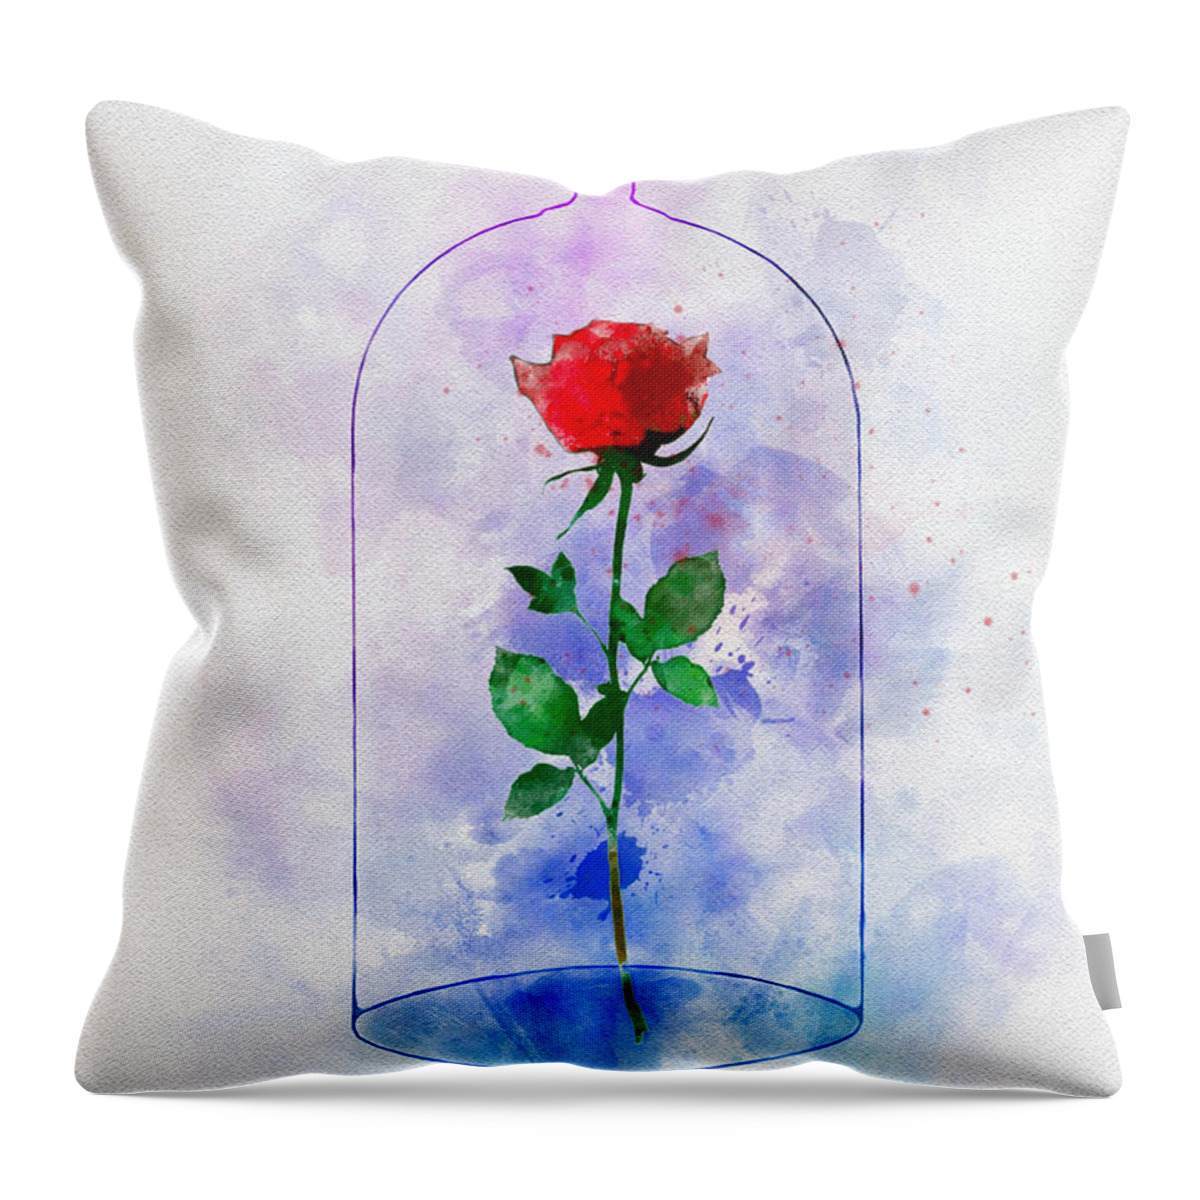 Enchanted Rose Throw Pillow featuring the mixed media Enchanted Rose by My Inspiration